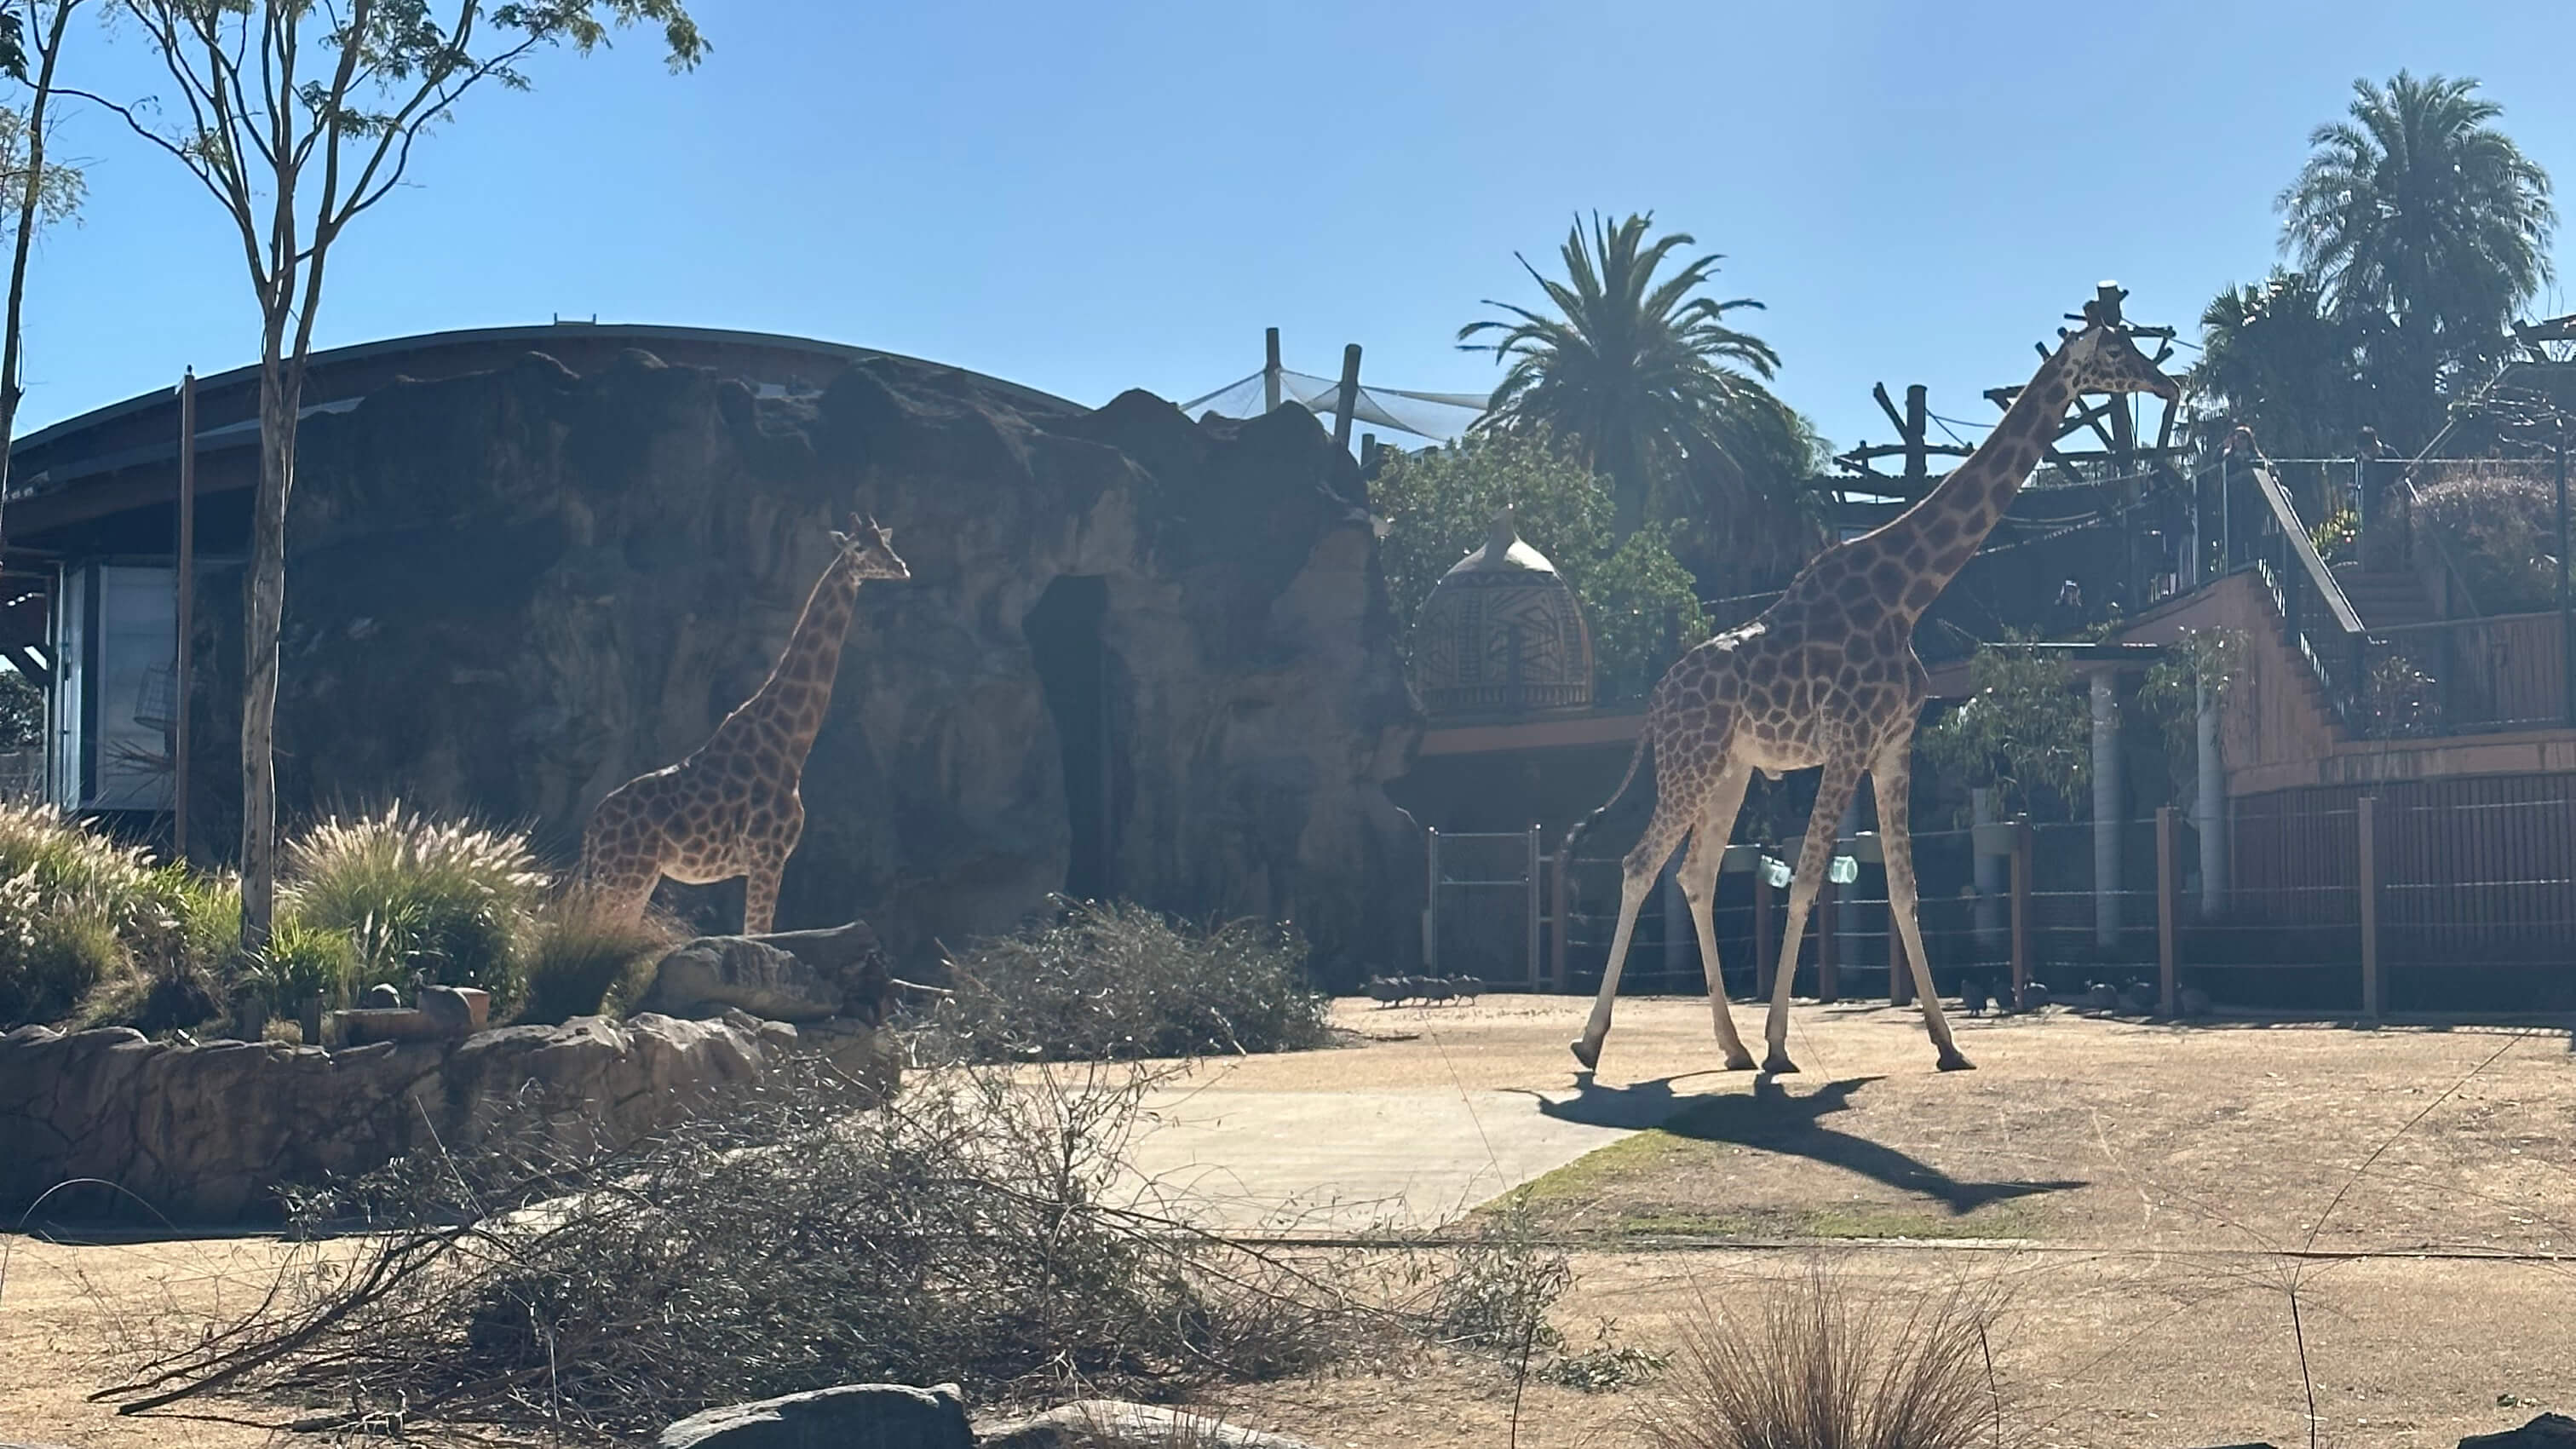 Two giraffes standing in an enclosure